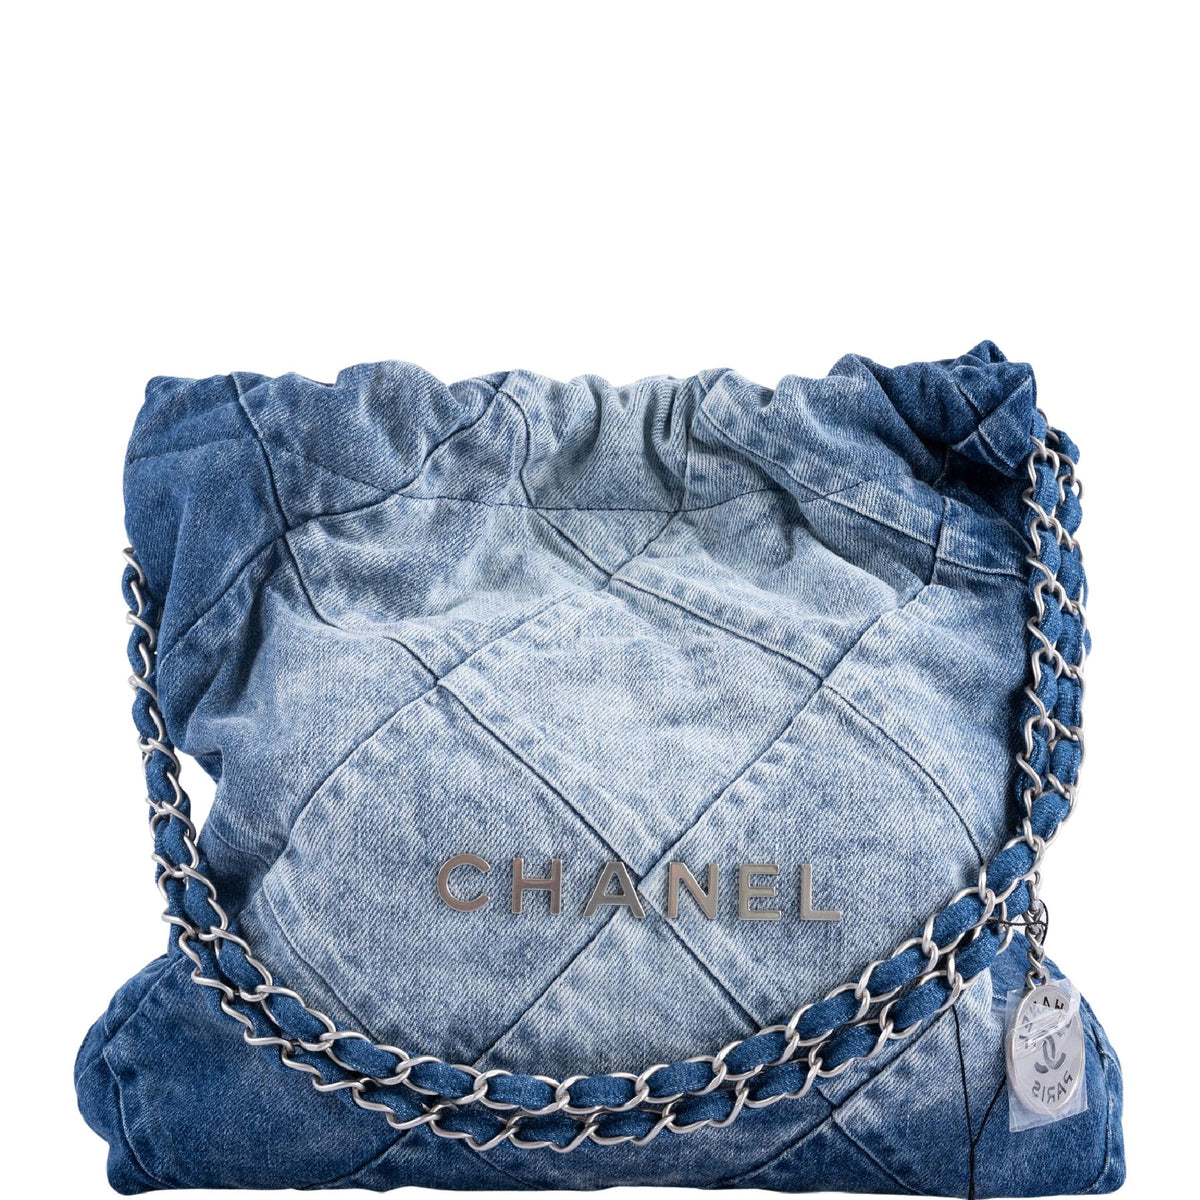 Chanel Blue CC Quilted Denim Medium Oversized Chain Flap Bag Gold